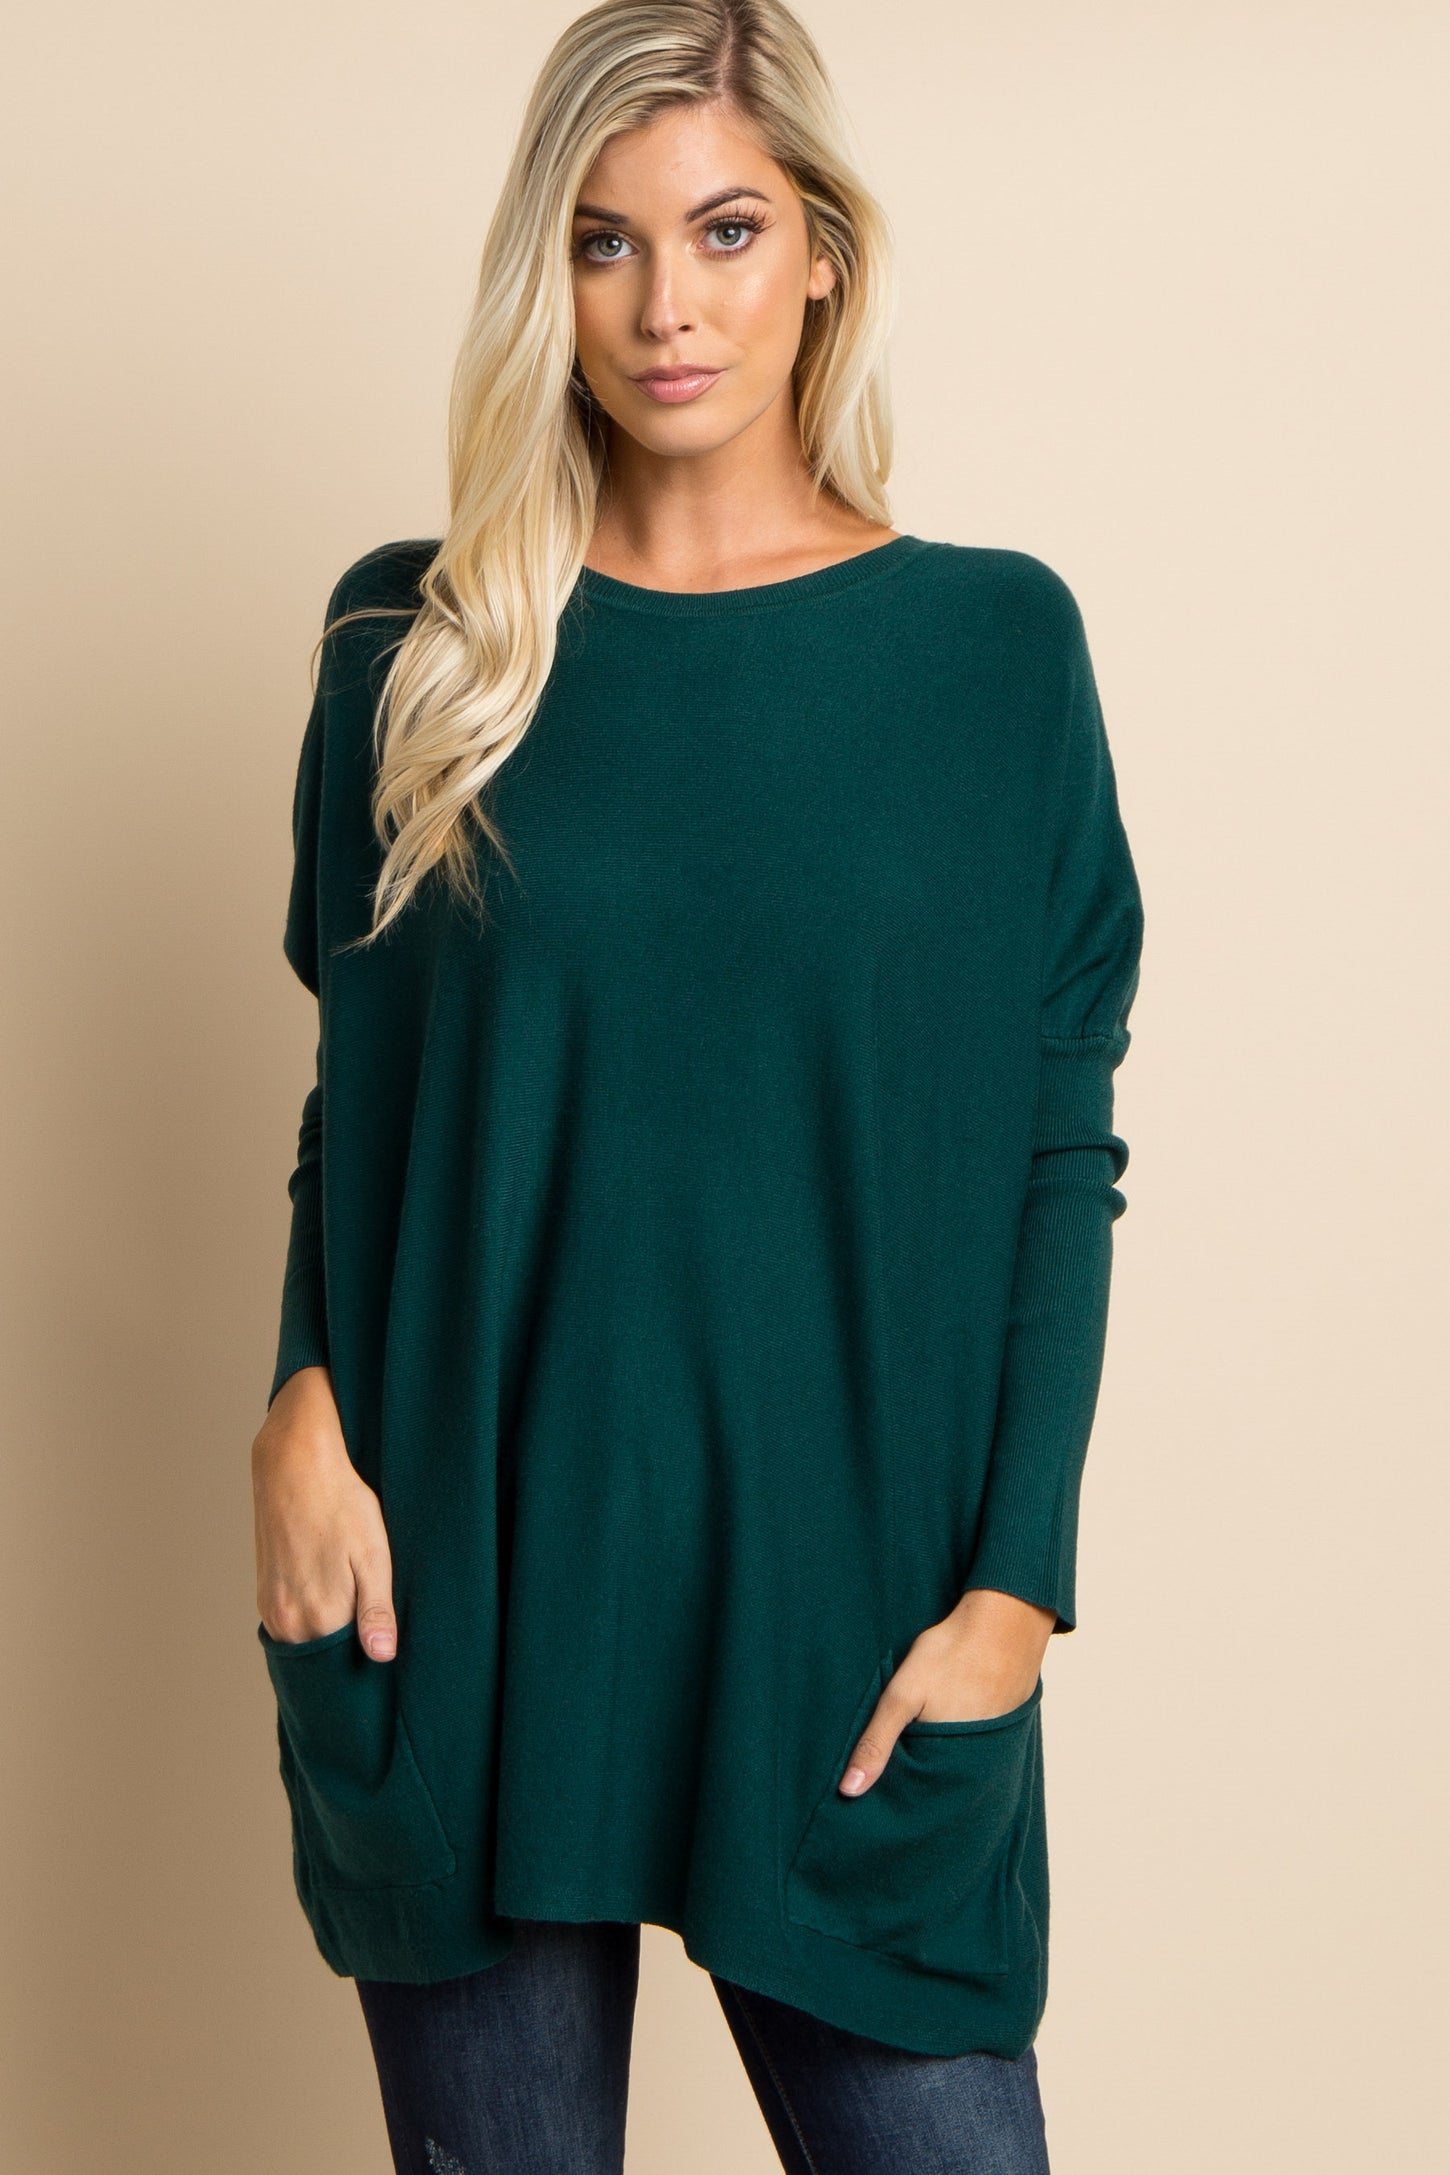 Green Pocketed Dolman Sleeve Maternity Top